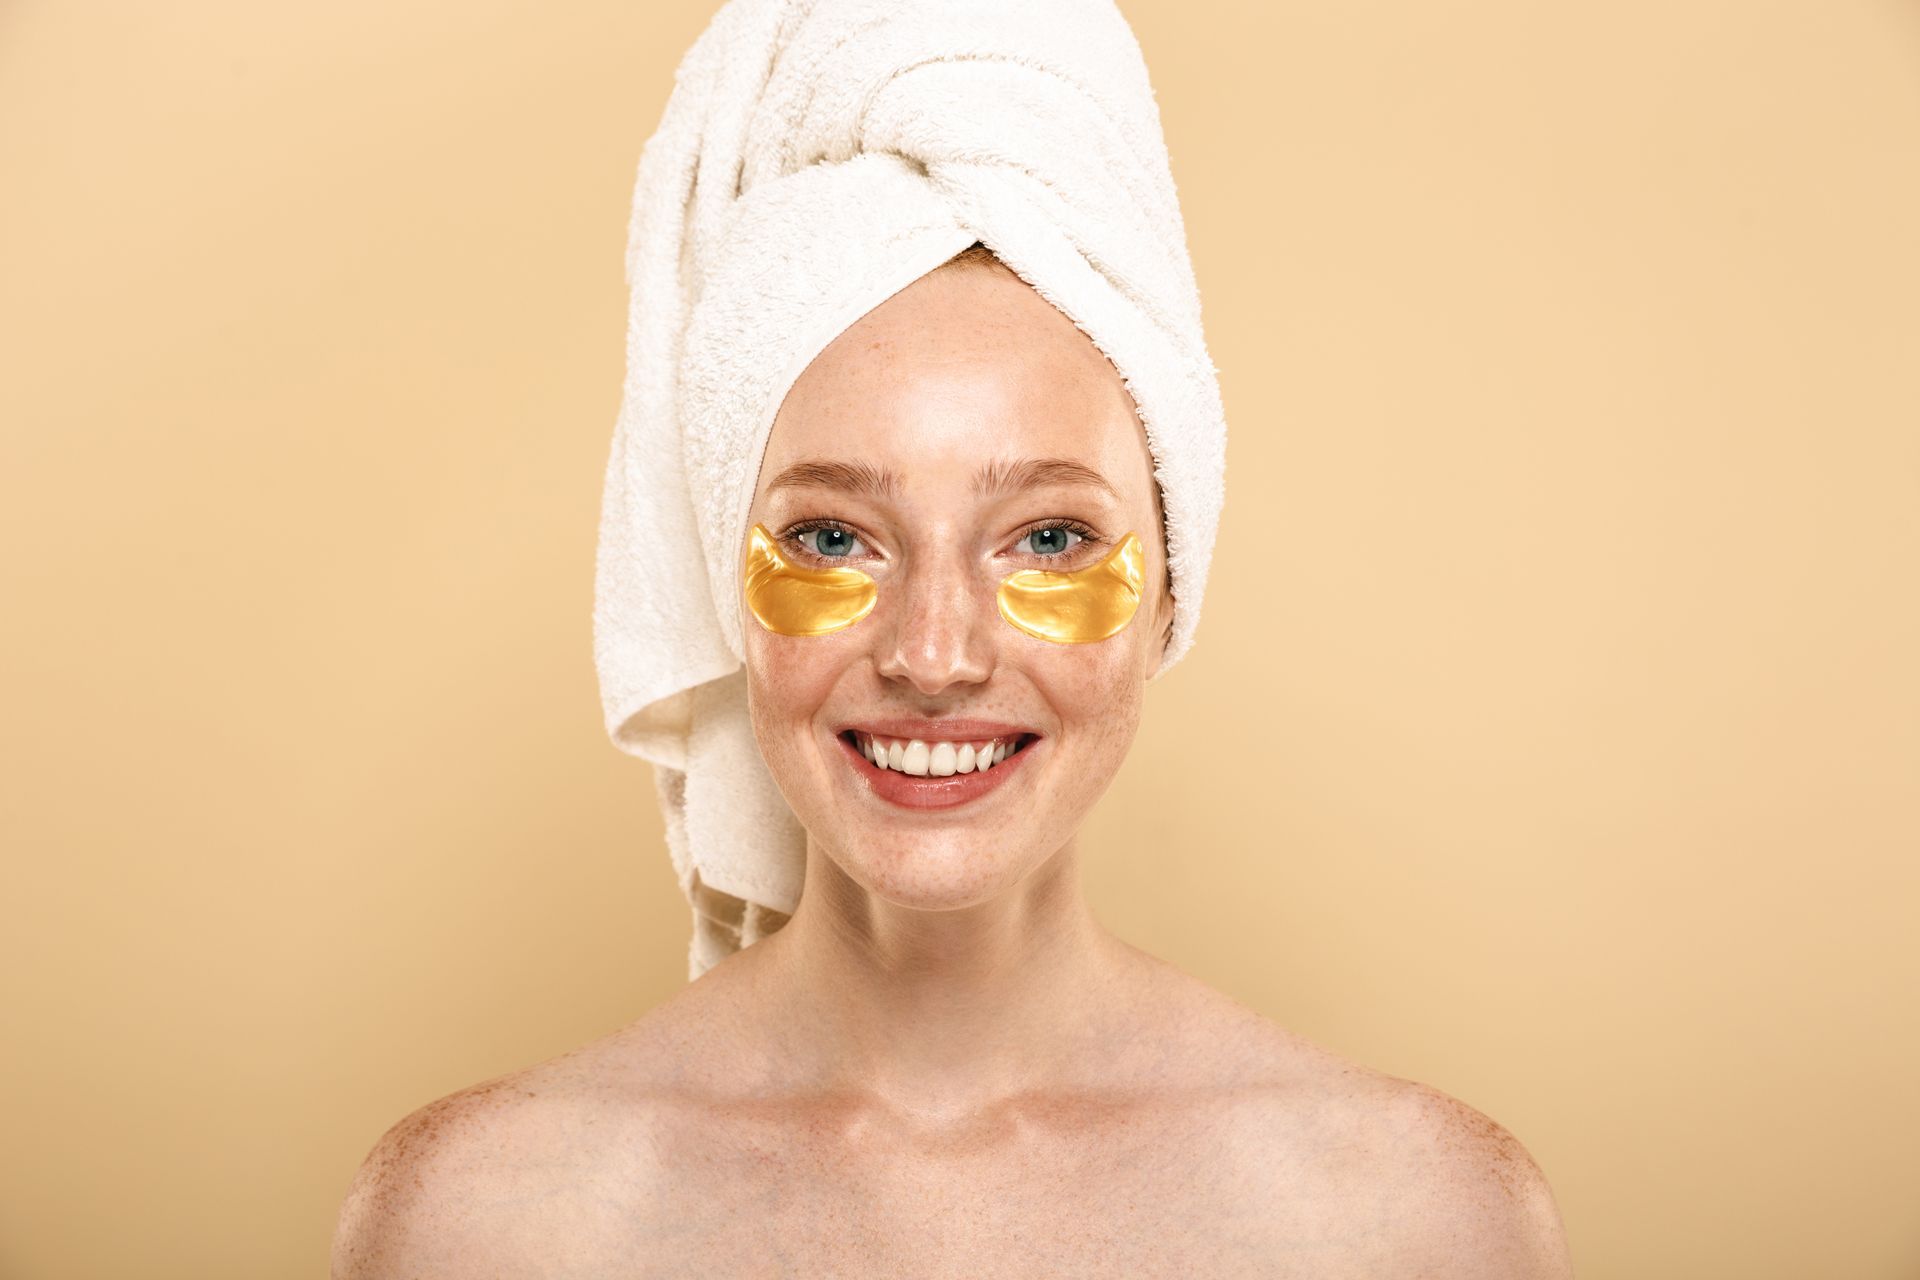 a woman with a towel wrapped around her head has gold eye patches on her face